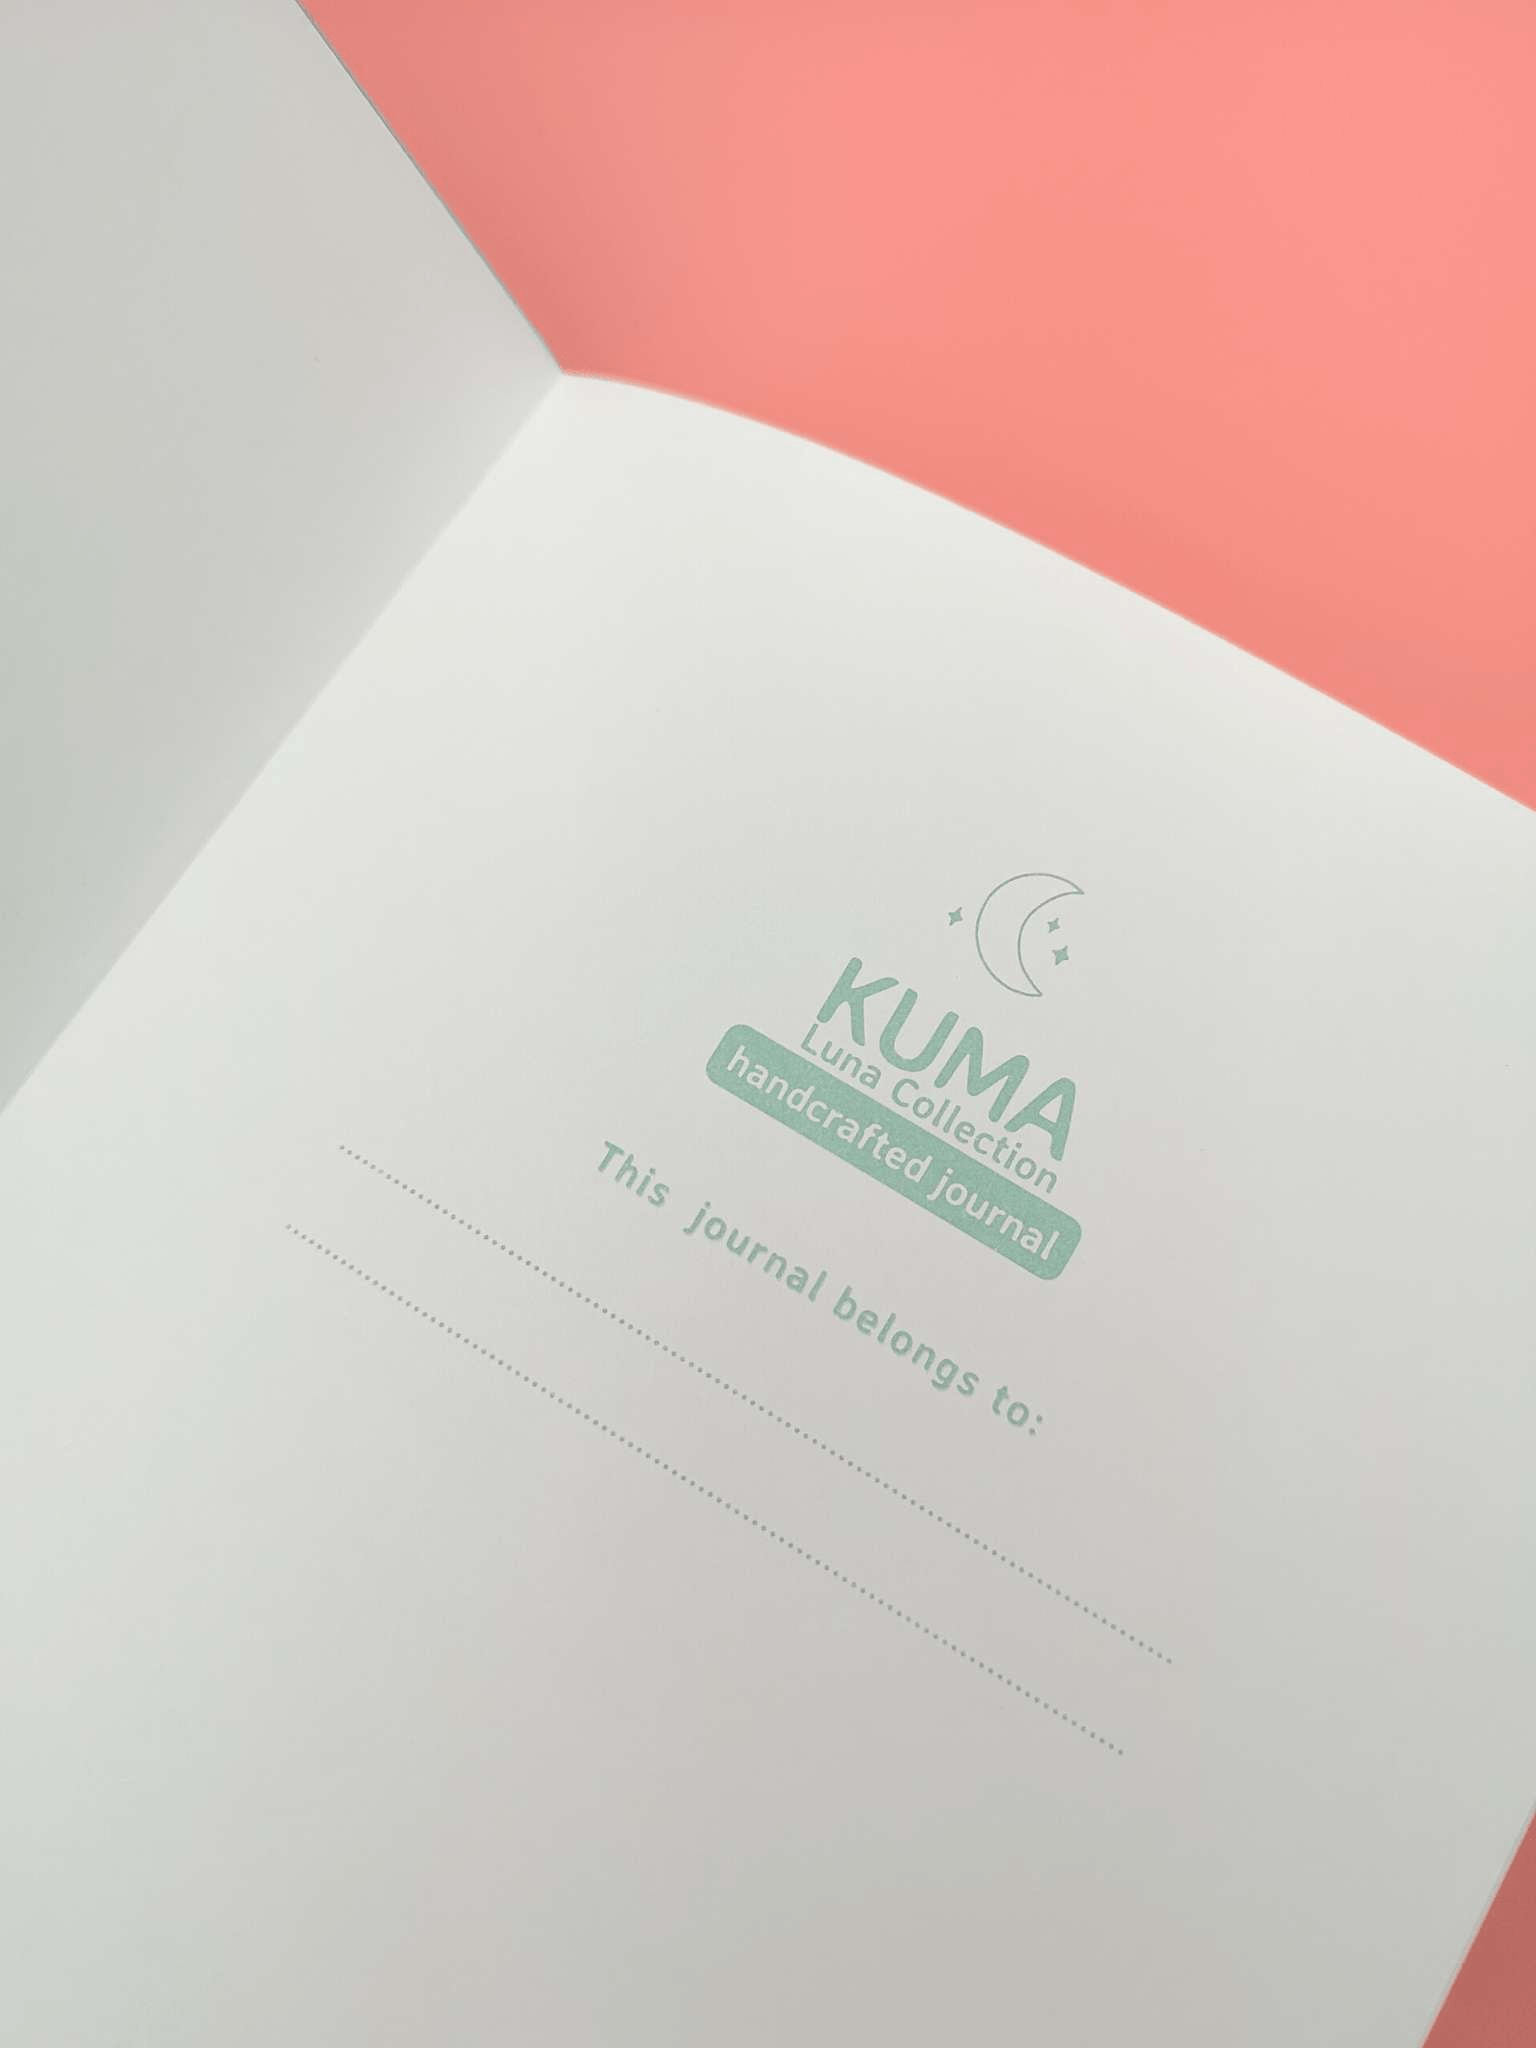 KUMA Stationery & Crafts Notebooks & Notepads A5 Luna 'Enchanted Moon' Limited Edition Bullet Journal 🌙